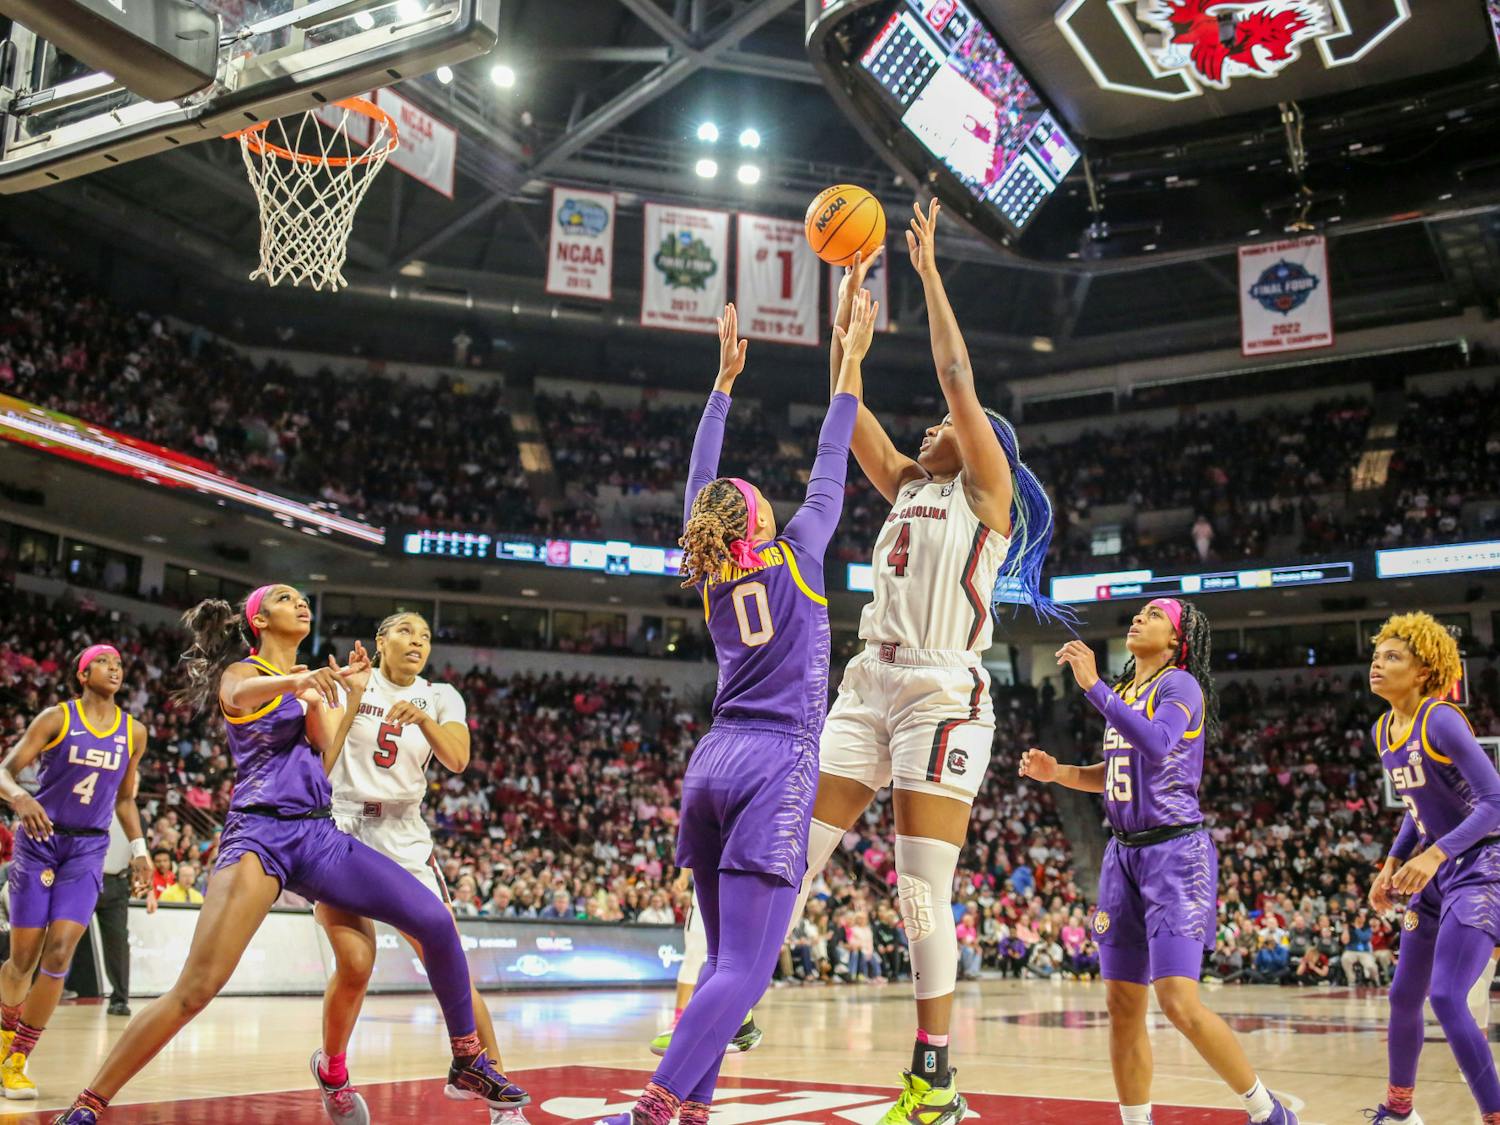 The South Carolina women's basketball team dominated LSU on Feb. 12, 2023, winning 88-64. This victory is the 25th of the season for the Gamecocks and the first loss of the season for the Tigers. The Gamecocks are the only team to remain undefeated in the NCAA for women's basketball.&nbsp;